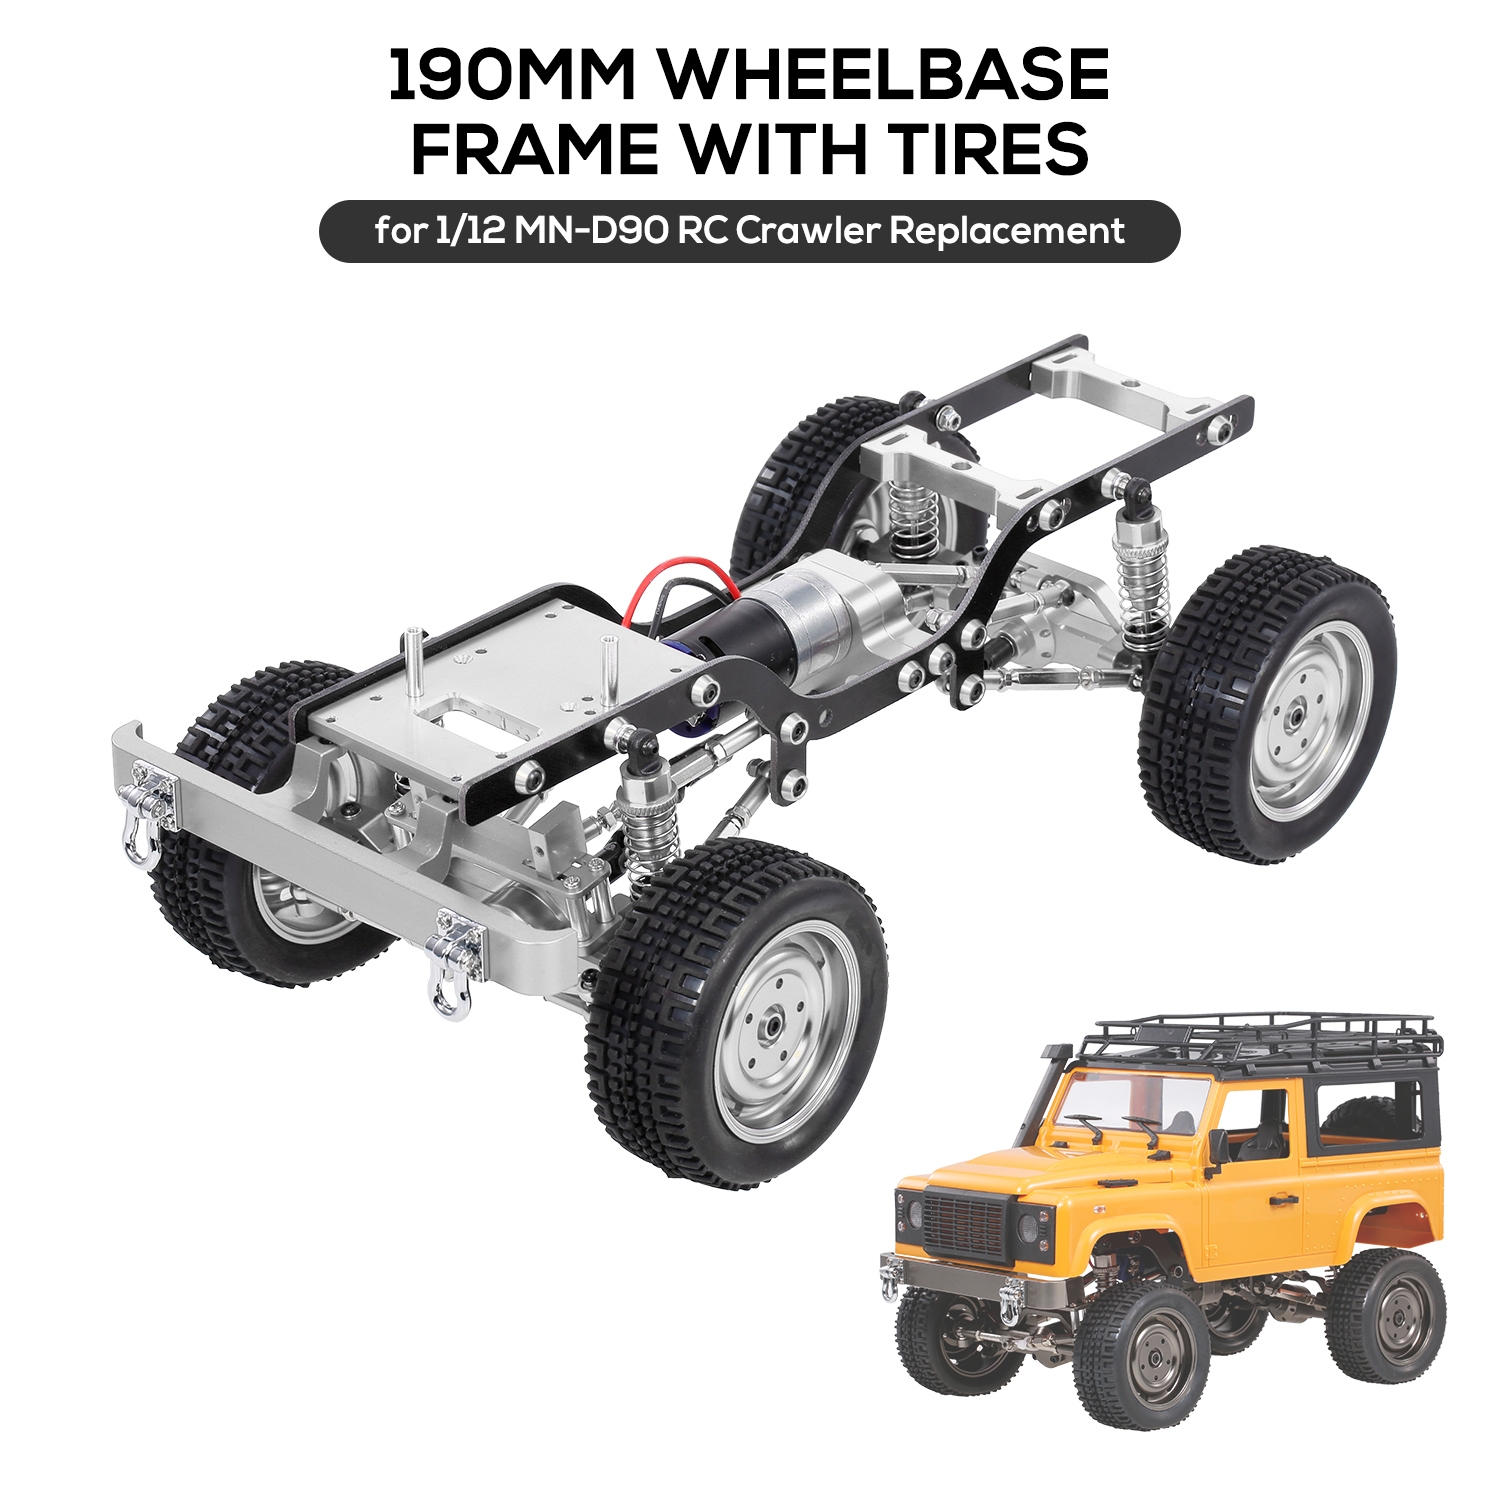 10% OFF For 1/12 All Metal Climbing Frame For MN D90 Crawler RC Car Parts Without Electric Parts